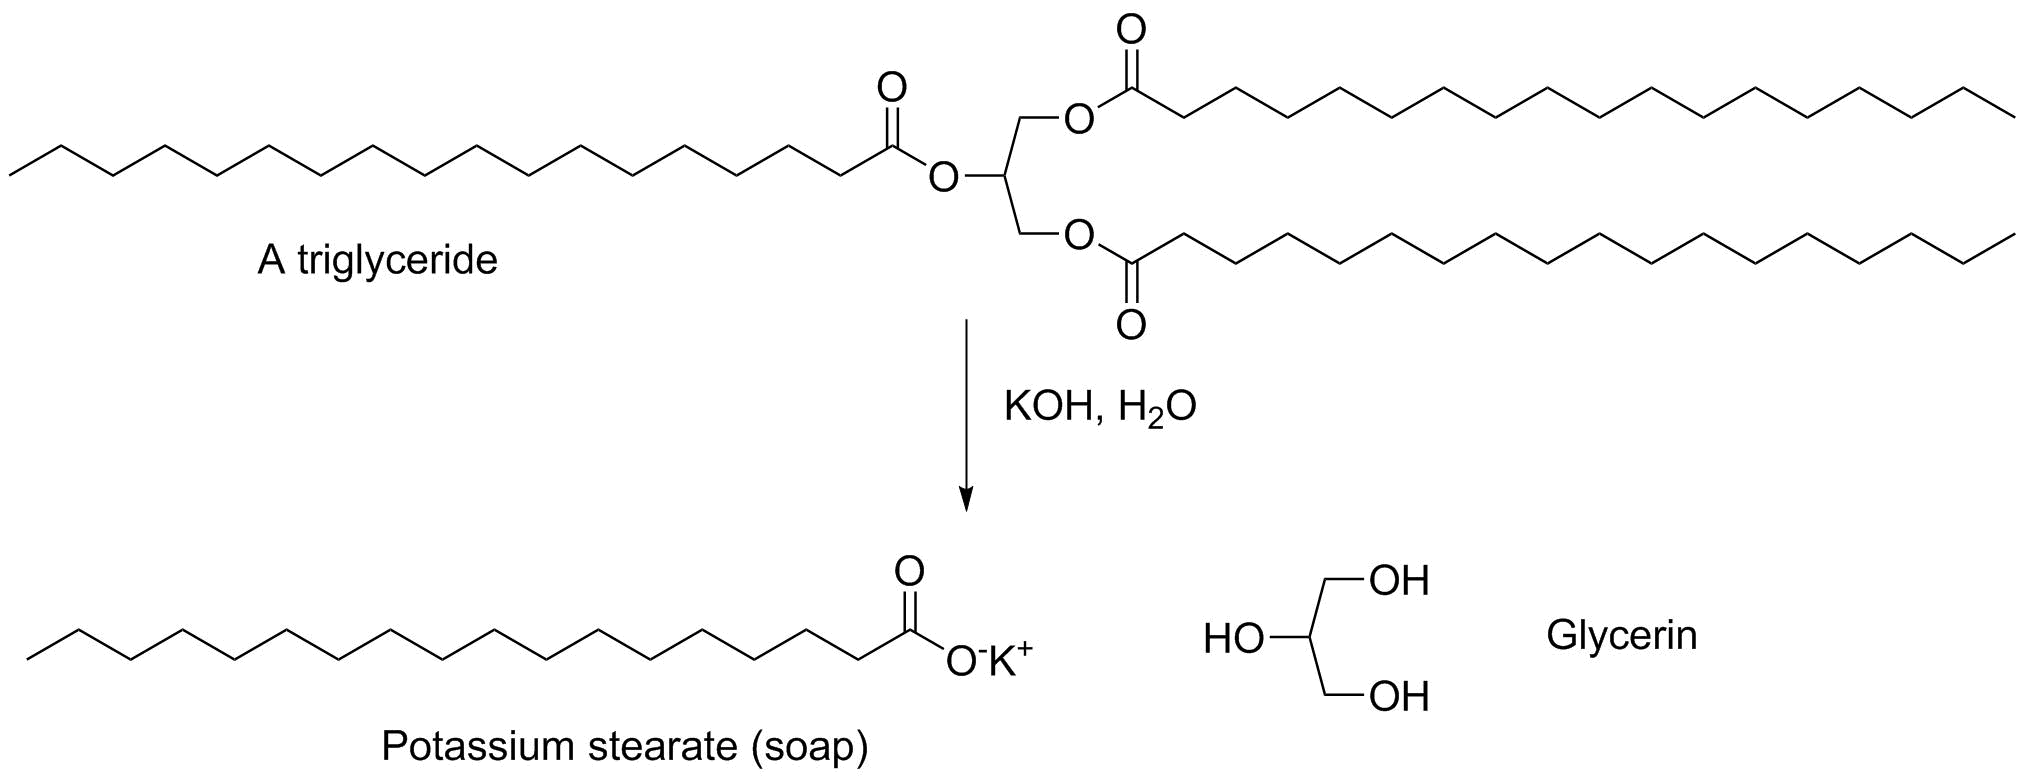 Saponification: basic hydrolysis of a triglyceride gives a soap (the salt of a fatty acid)